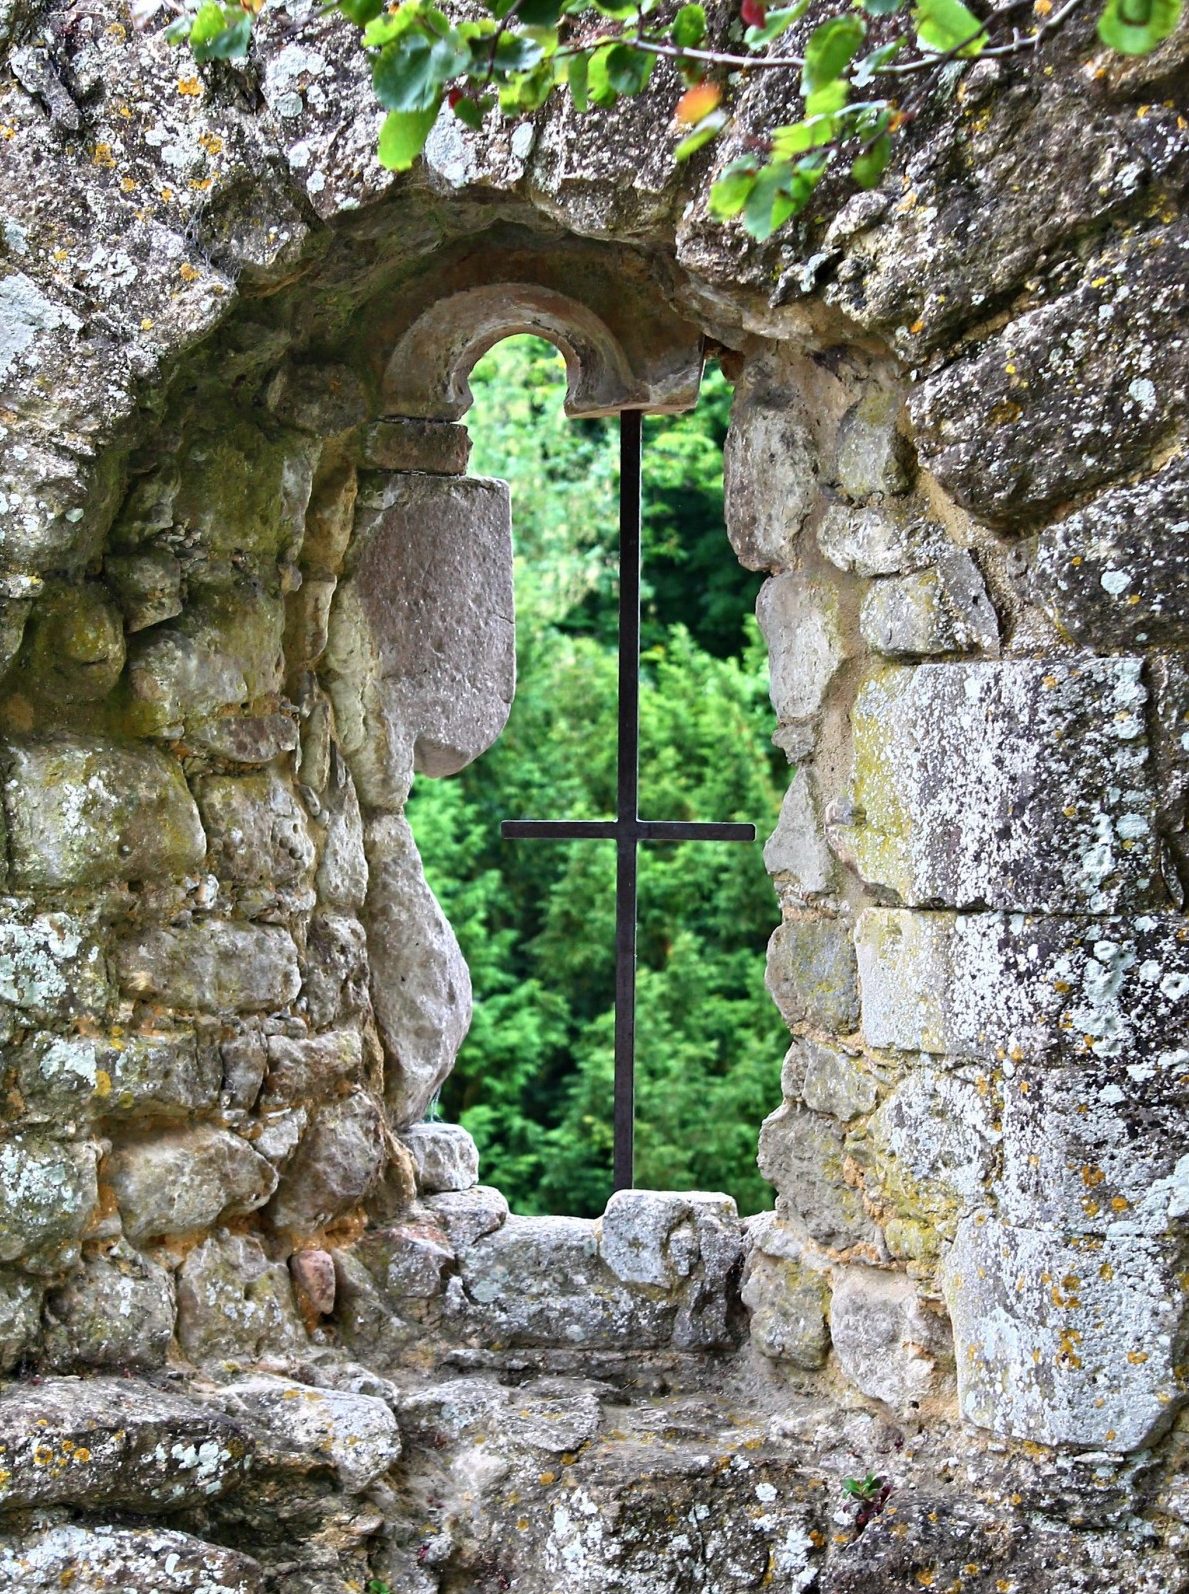 Stone garden wall with a whimsical window